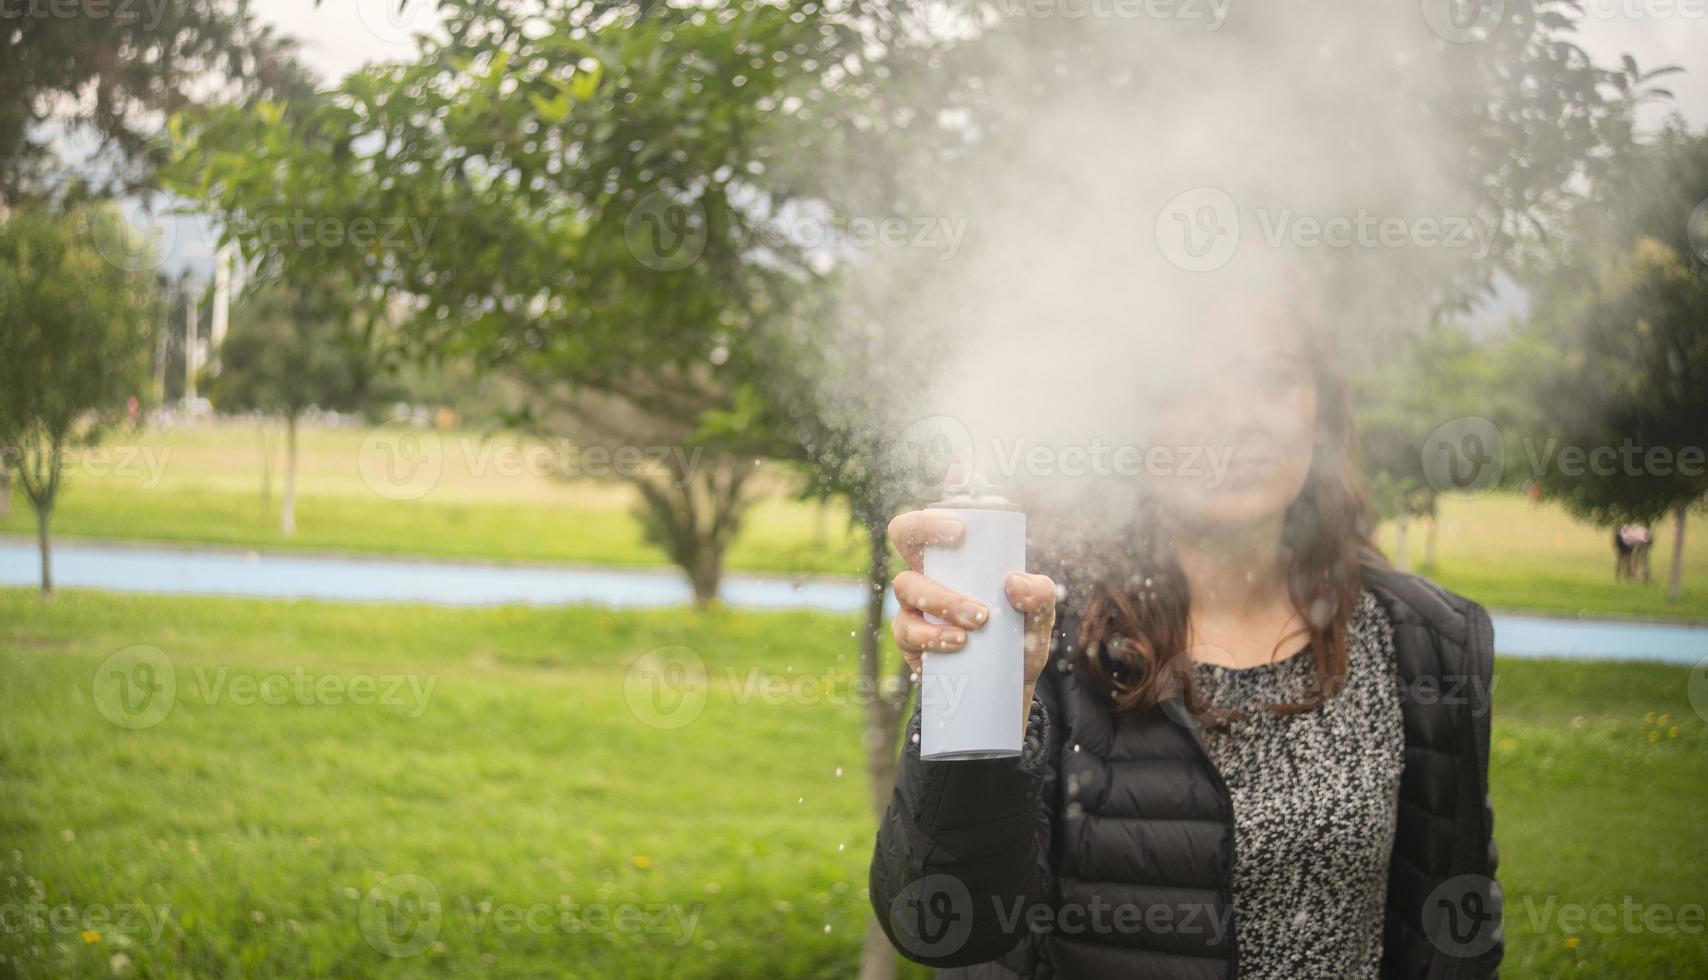 Hispanic woman shooting a stream of white foam from a spray can in the middle of a park photo